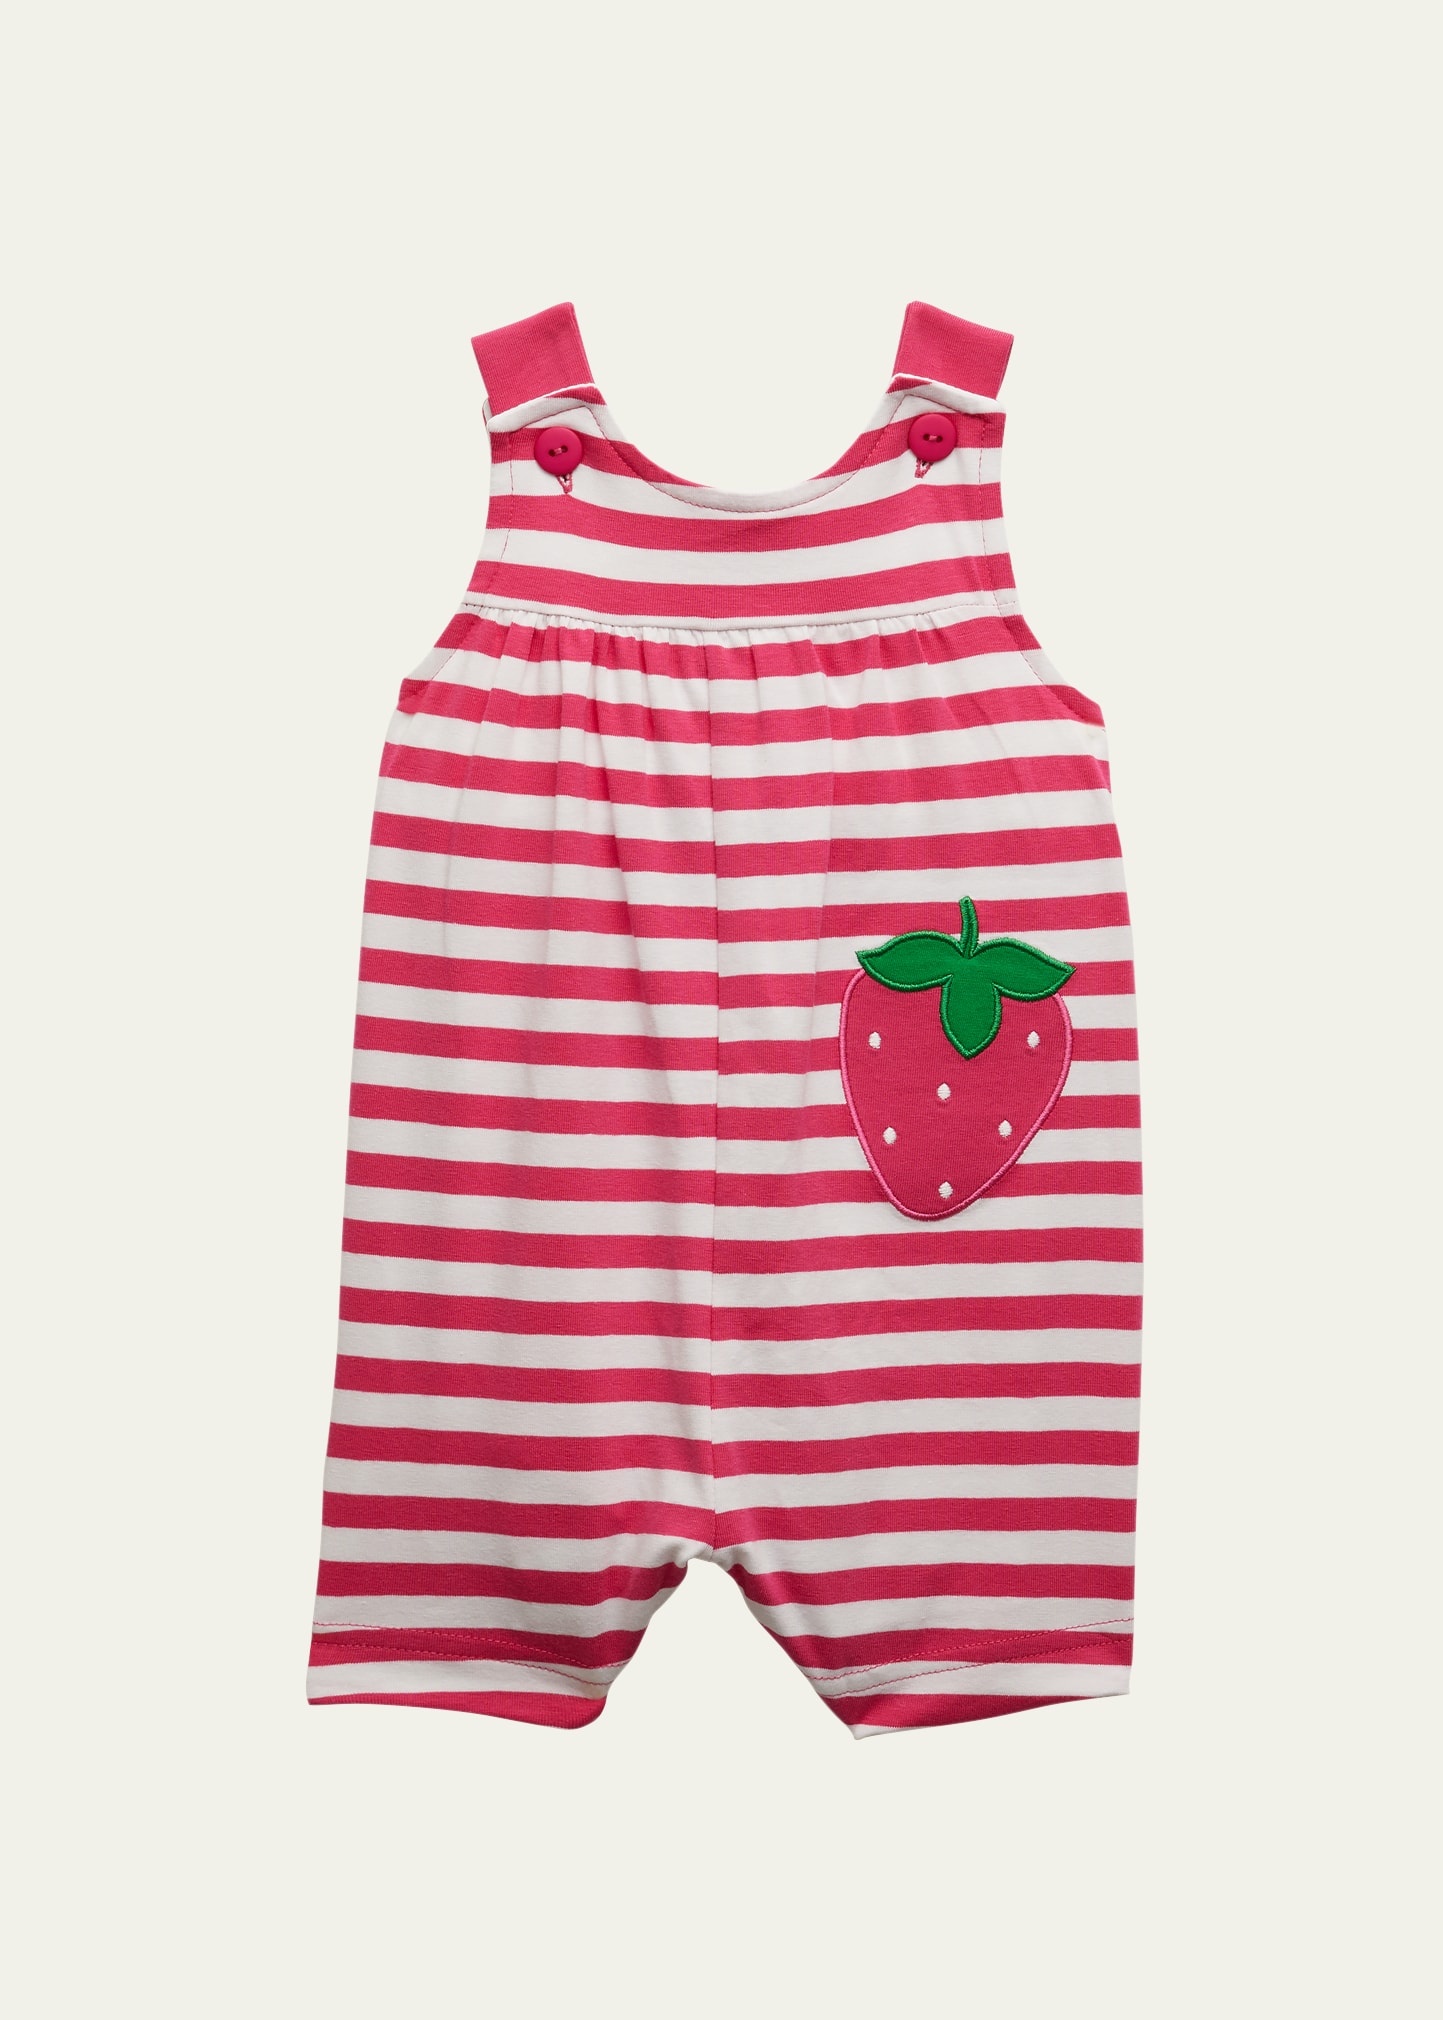 Florence Eiseman Girl's Striped Knit Embroidered Strawberry Playsuit, Size 3M-24M